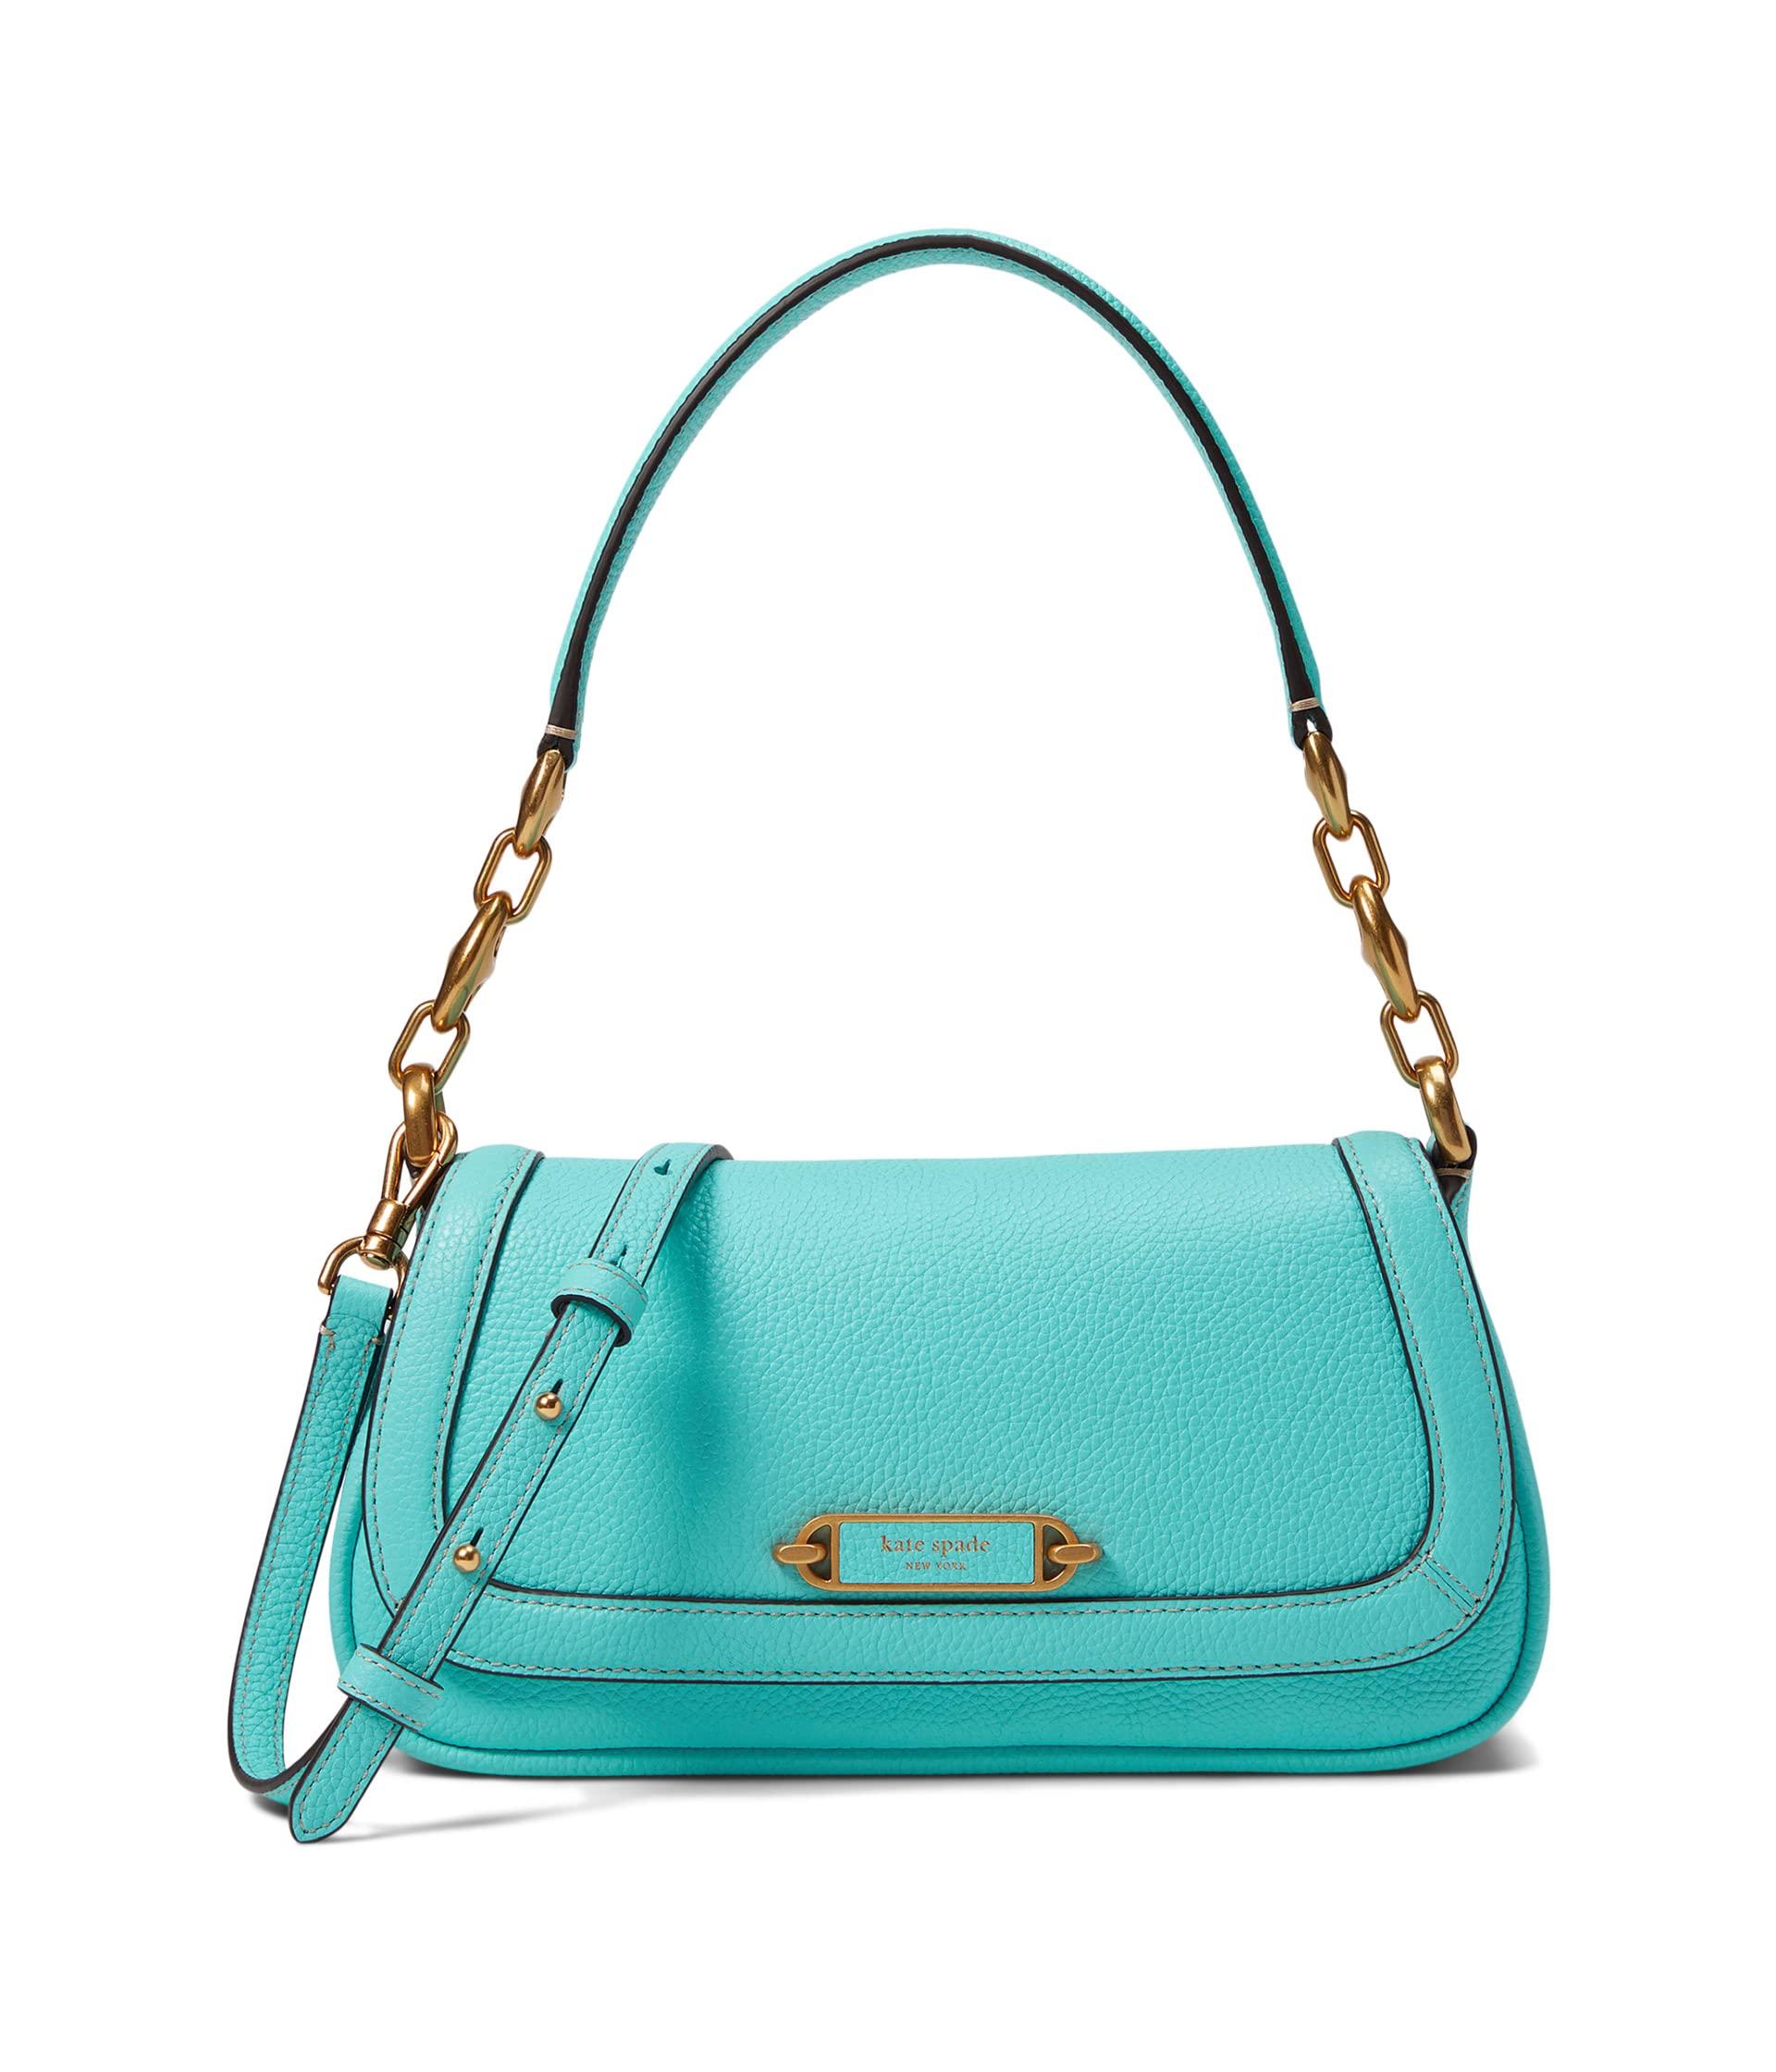 Kate Spade Gramercy Pebbled Leather Small Flap Shoulder Bag in Blue | Lyst